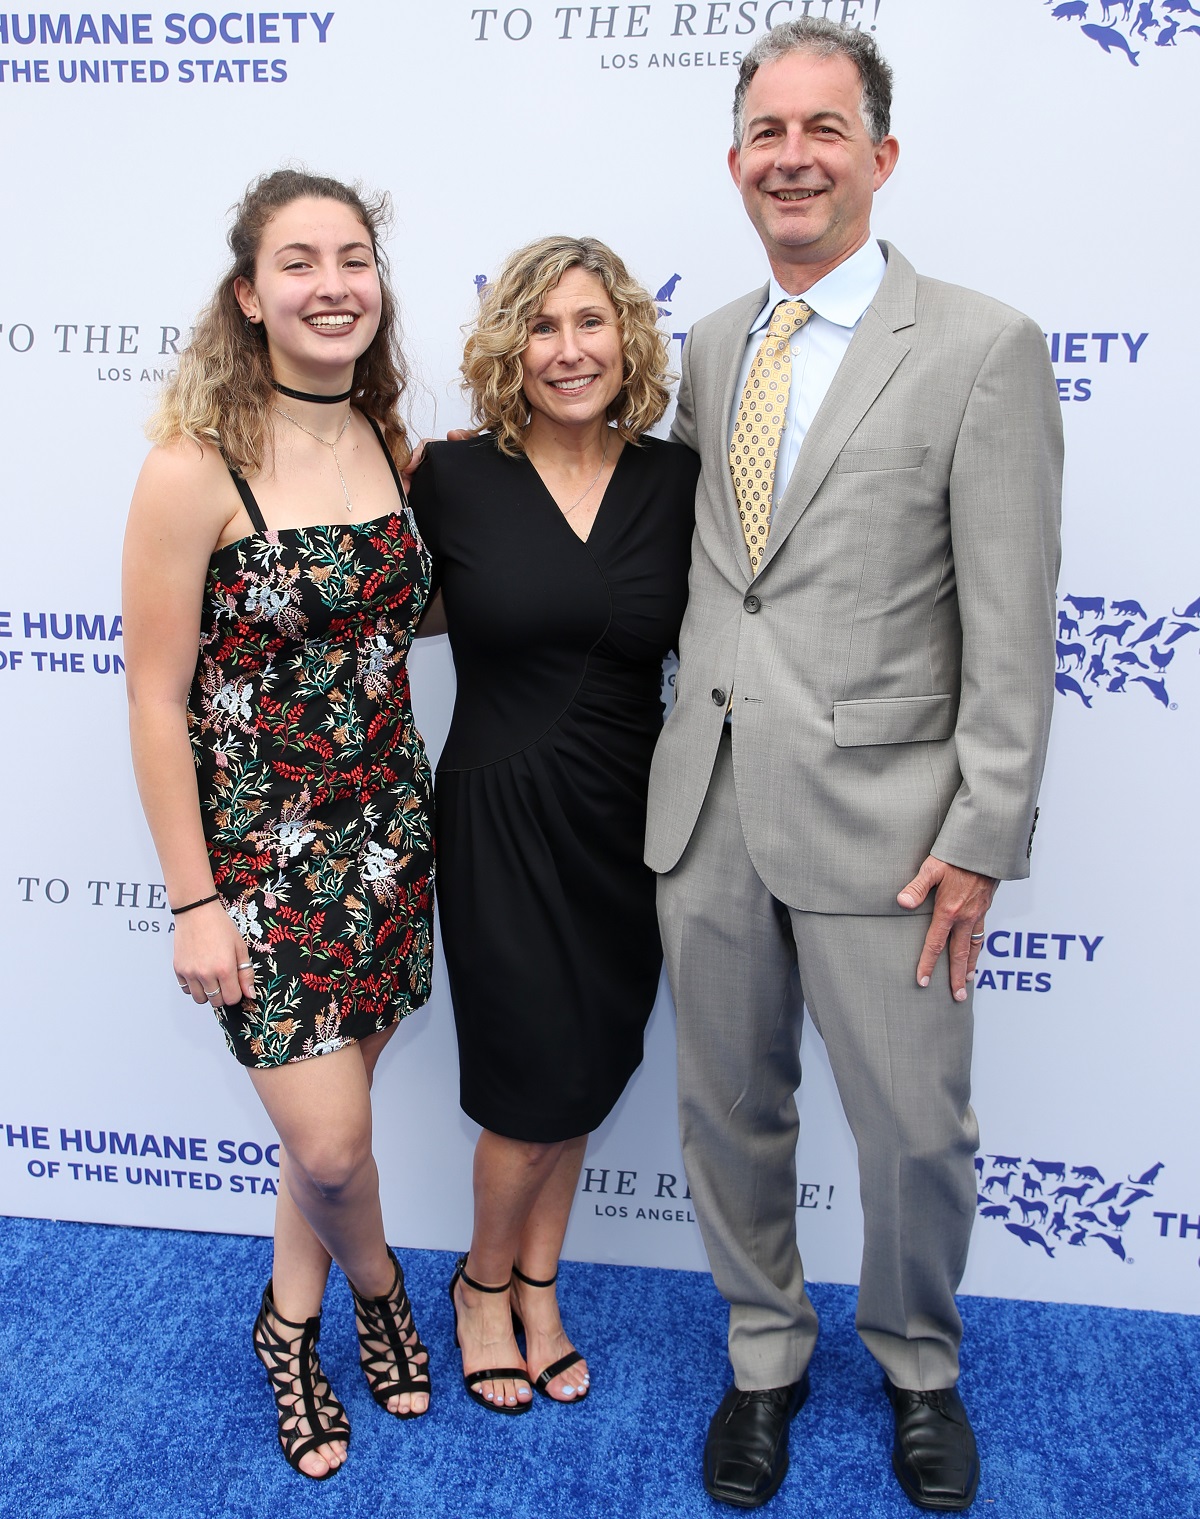 Kitty Block, president and chief executive officer of The Humane Society of the United States, center, and family walk the red carpet at the Humane Society of the United States&#039; To the Rescue! Los Angeles gala. The gala was held Saturday, April 21, 2018 at Paramount Studios and benefitted the HSUS&#039; Farm Animal Protection campaign. Competitive Surfer Conrad Carr, undercover investigators Whitney Warrington and Mary Beth Sweetland, and law firm Latham &amp; Watkins, LLP were honored at the event, which featured performances by Moby. (Photo by (Danny Moloshok/Invision for The Humane Society of the United States/AP Images)